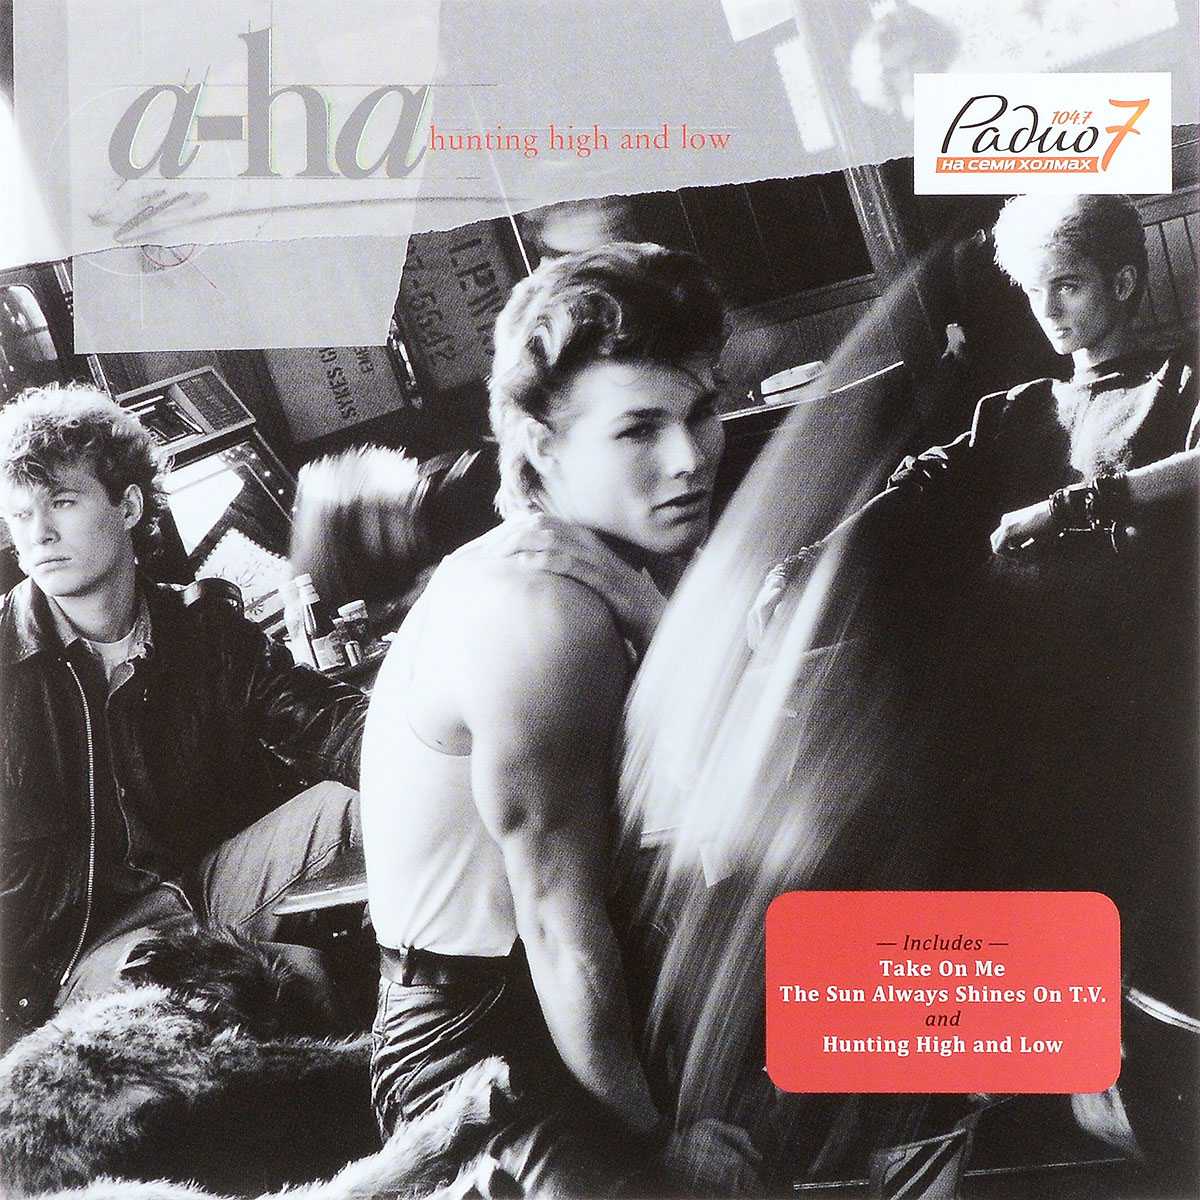 A ha hunting high. A-ha "Hunting High and Low". A-ha Hunting High and Low обложка. A-ha Hunting High and Low album. A-ha Hunting High and Low 1985.